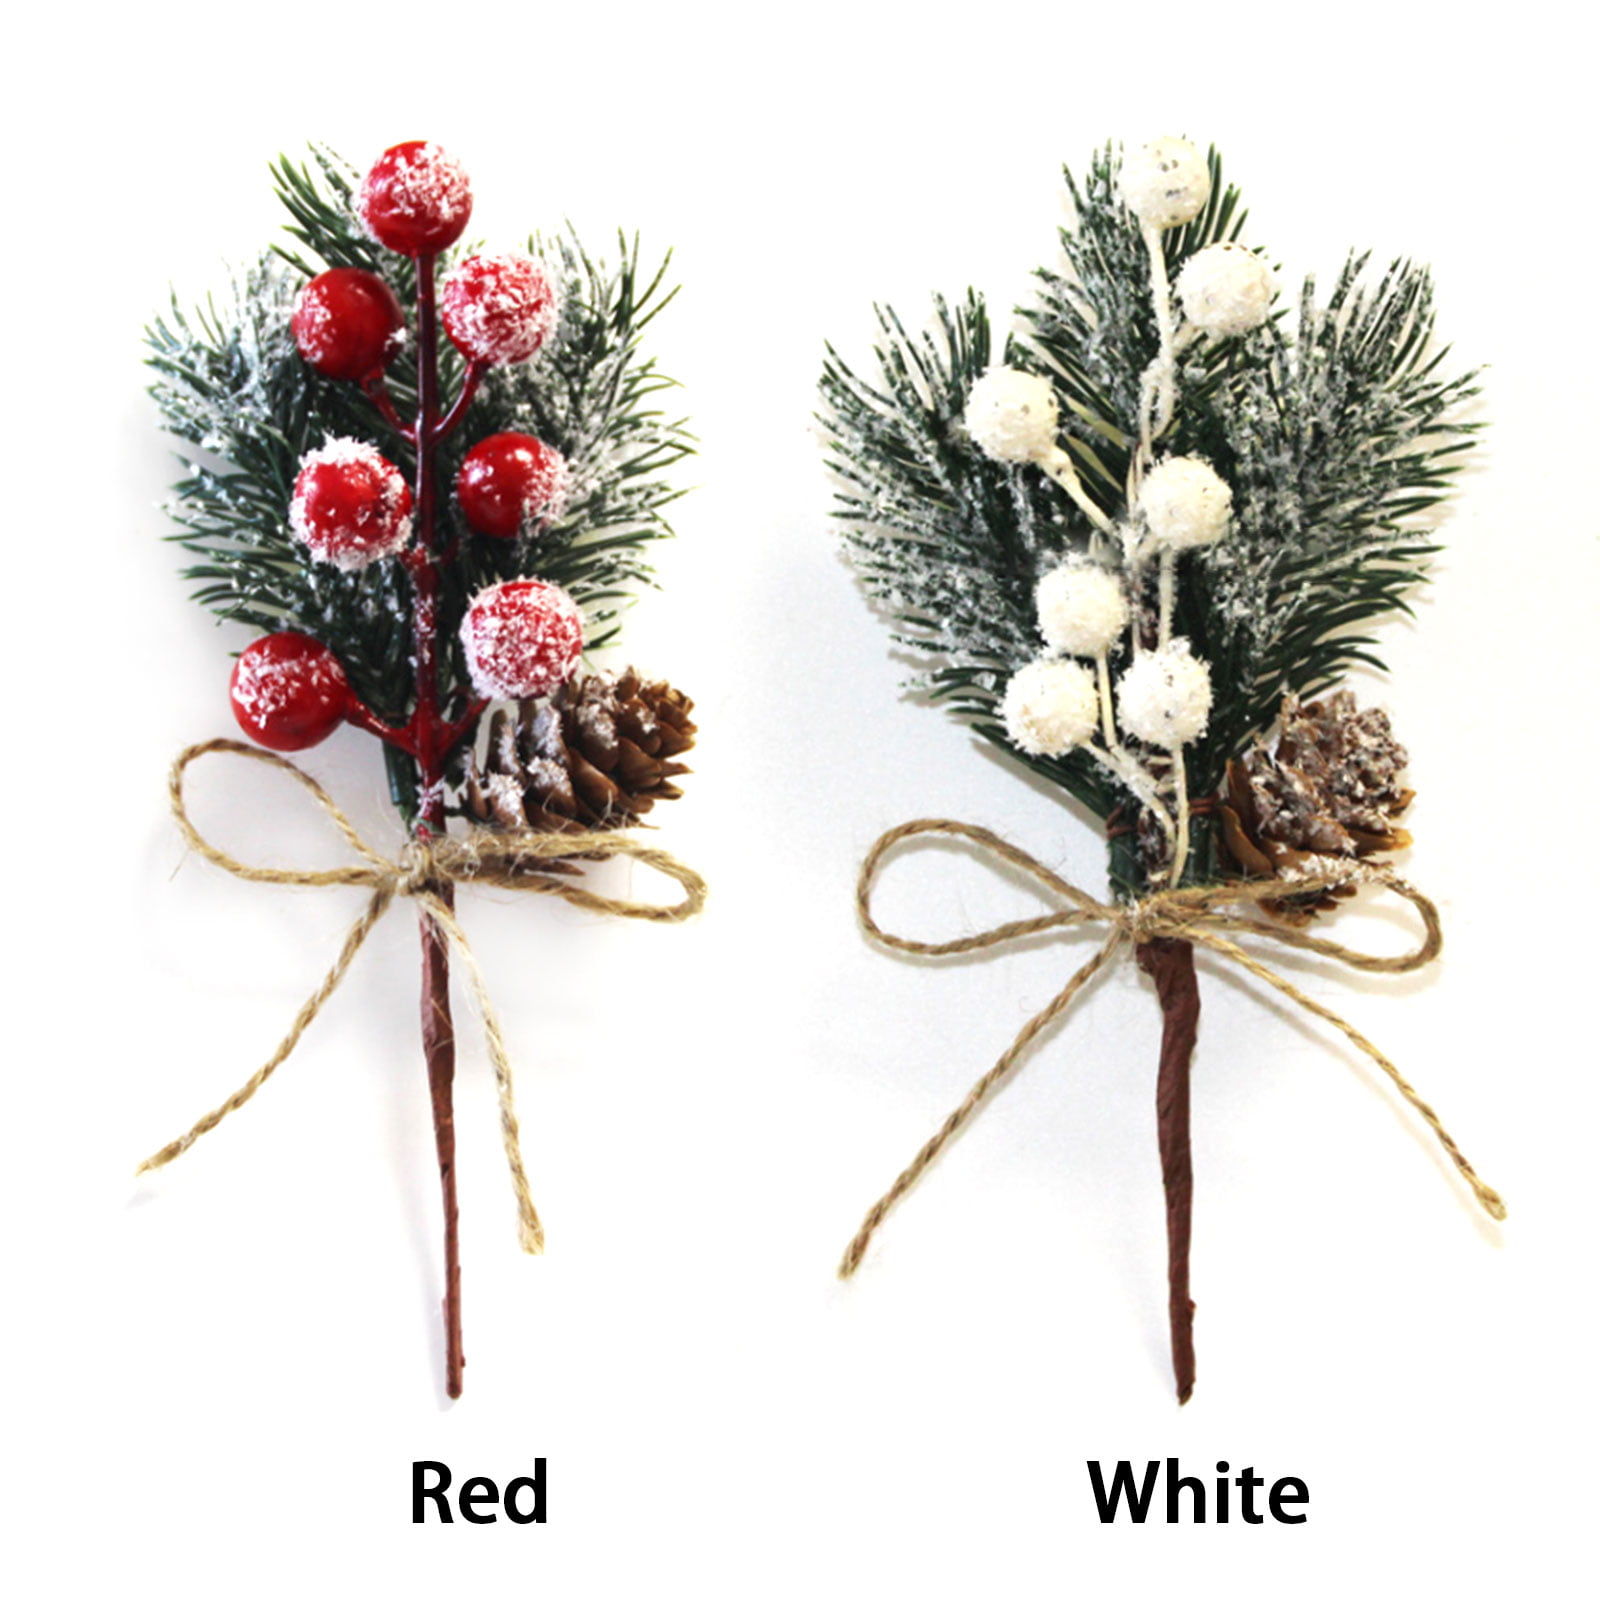 Lulu Home 16 Pieces Christmas Picks, Artificial Pine Branches with